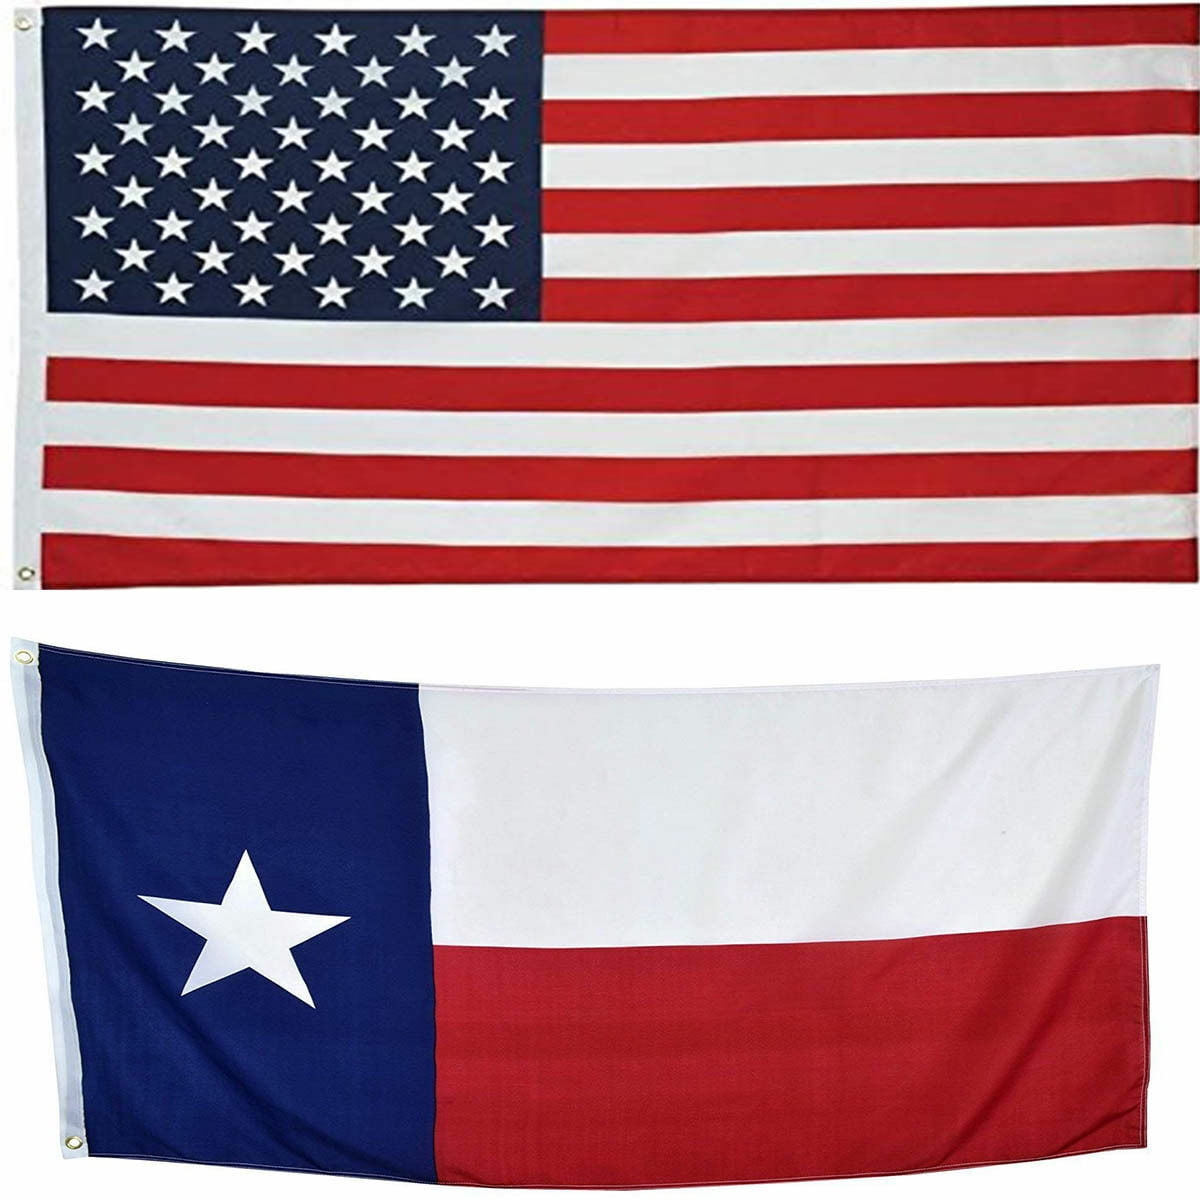 RUF 12x18 State of Texas 12"x18" Premium Nylon Embroidered 300D Flag Grommets 